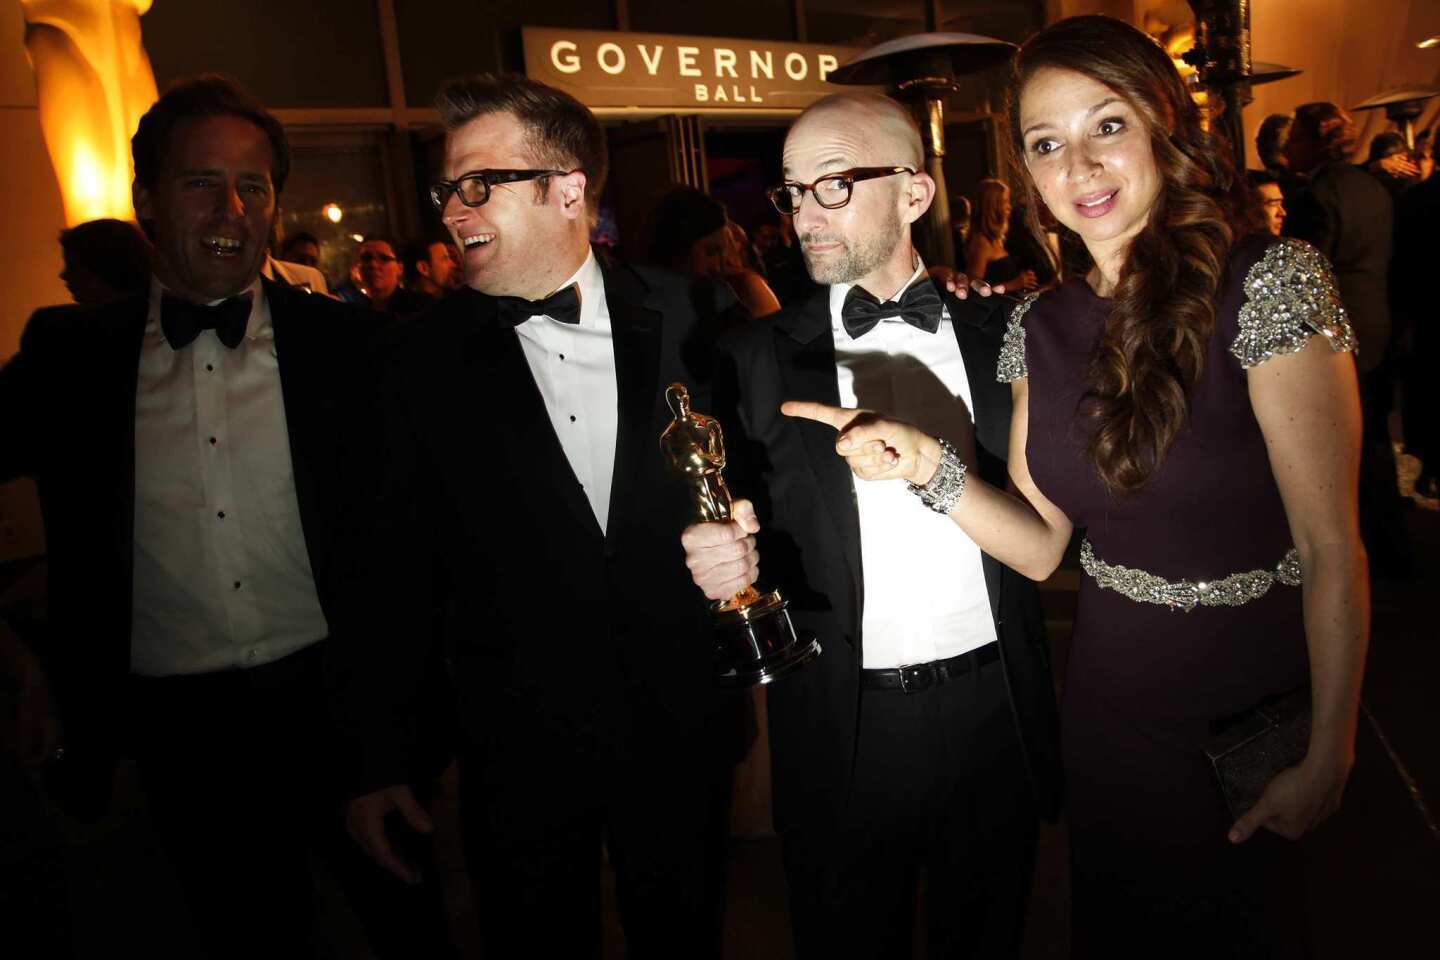 "Bridesmaids" actress Maya Rudolph jokes with Jim Rash, who holds his Oscar for best adapted screenplay for "The Descendants."